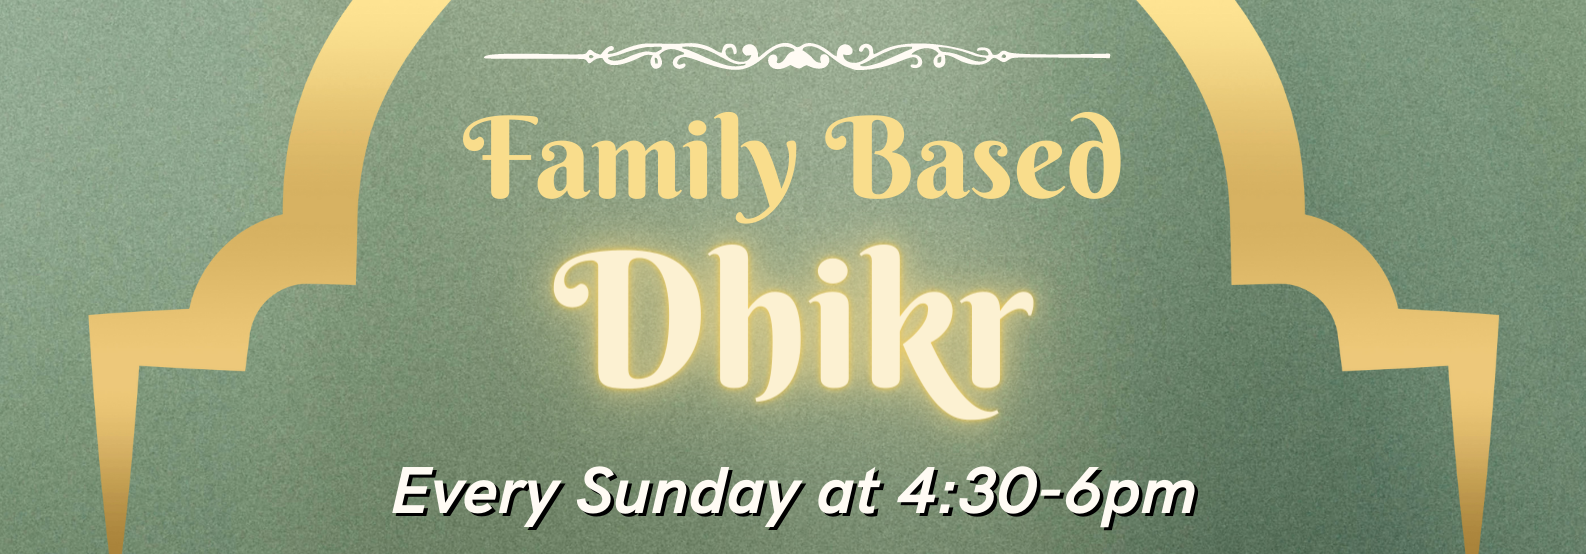 TOP Family Based Dhikr